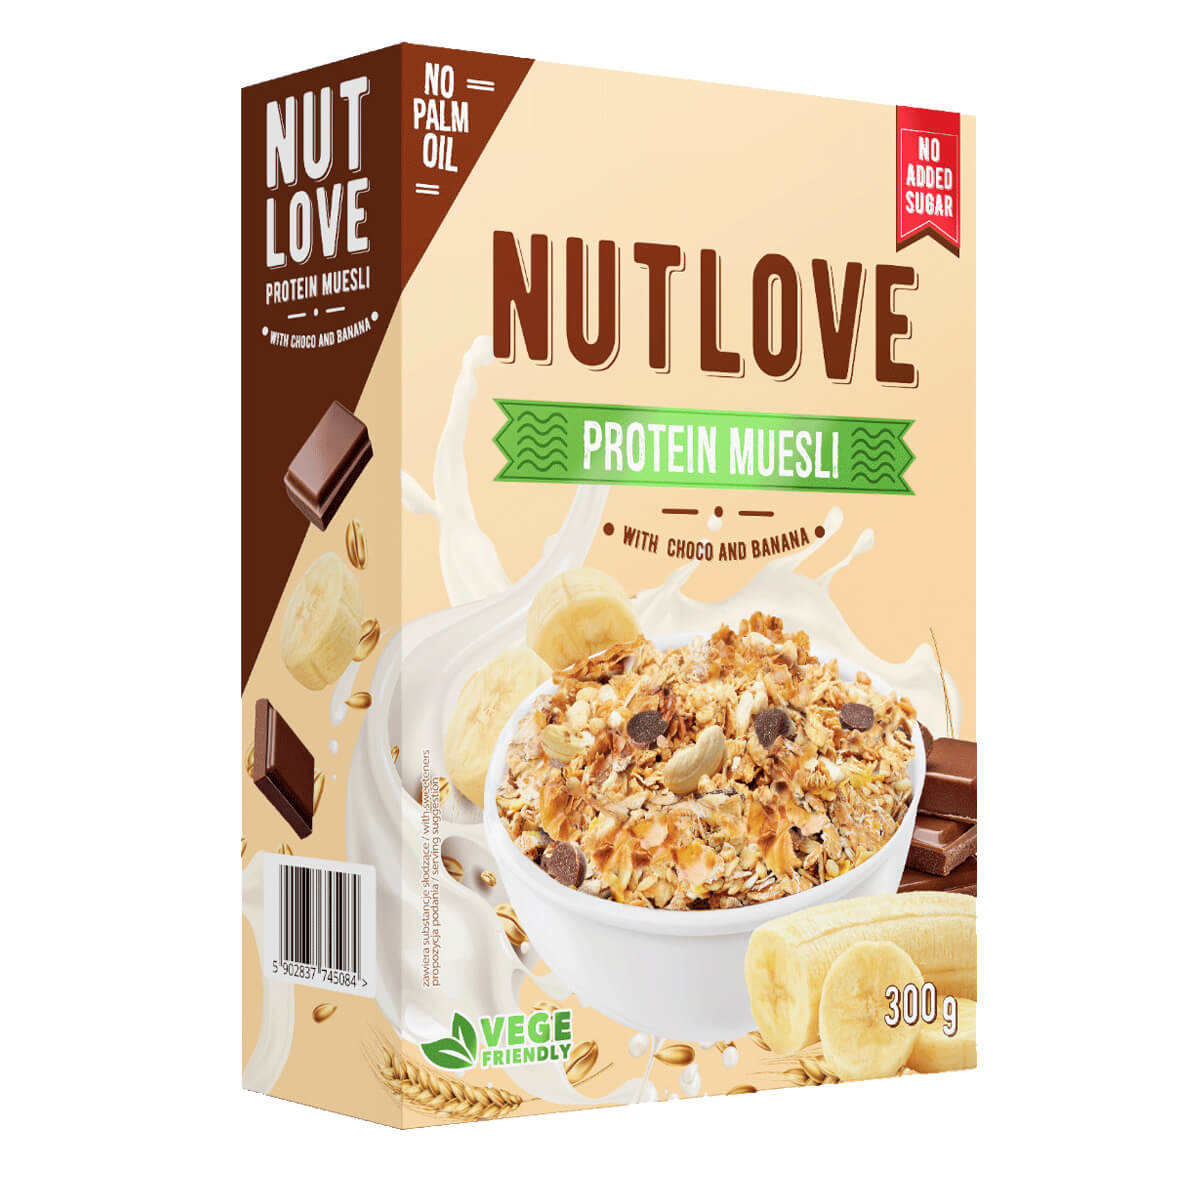 NUTLOVE Protein Muesli With Choco And Banana 300g - ALLNUTRITION • 7 € •  LOWEST PRICES •